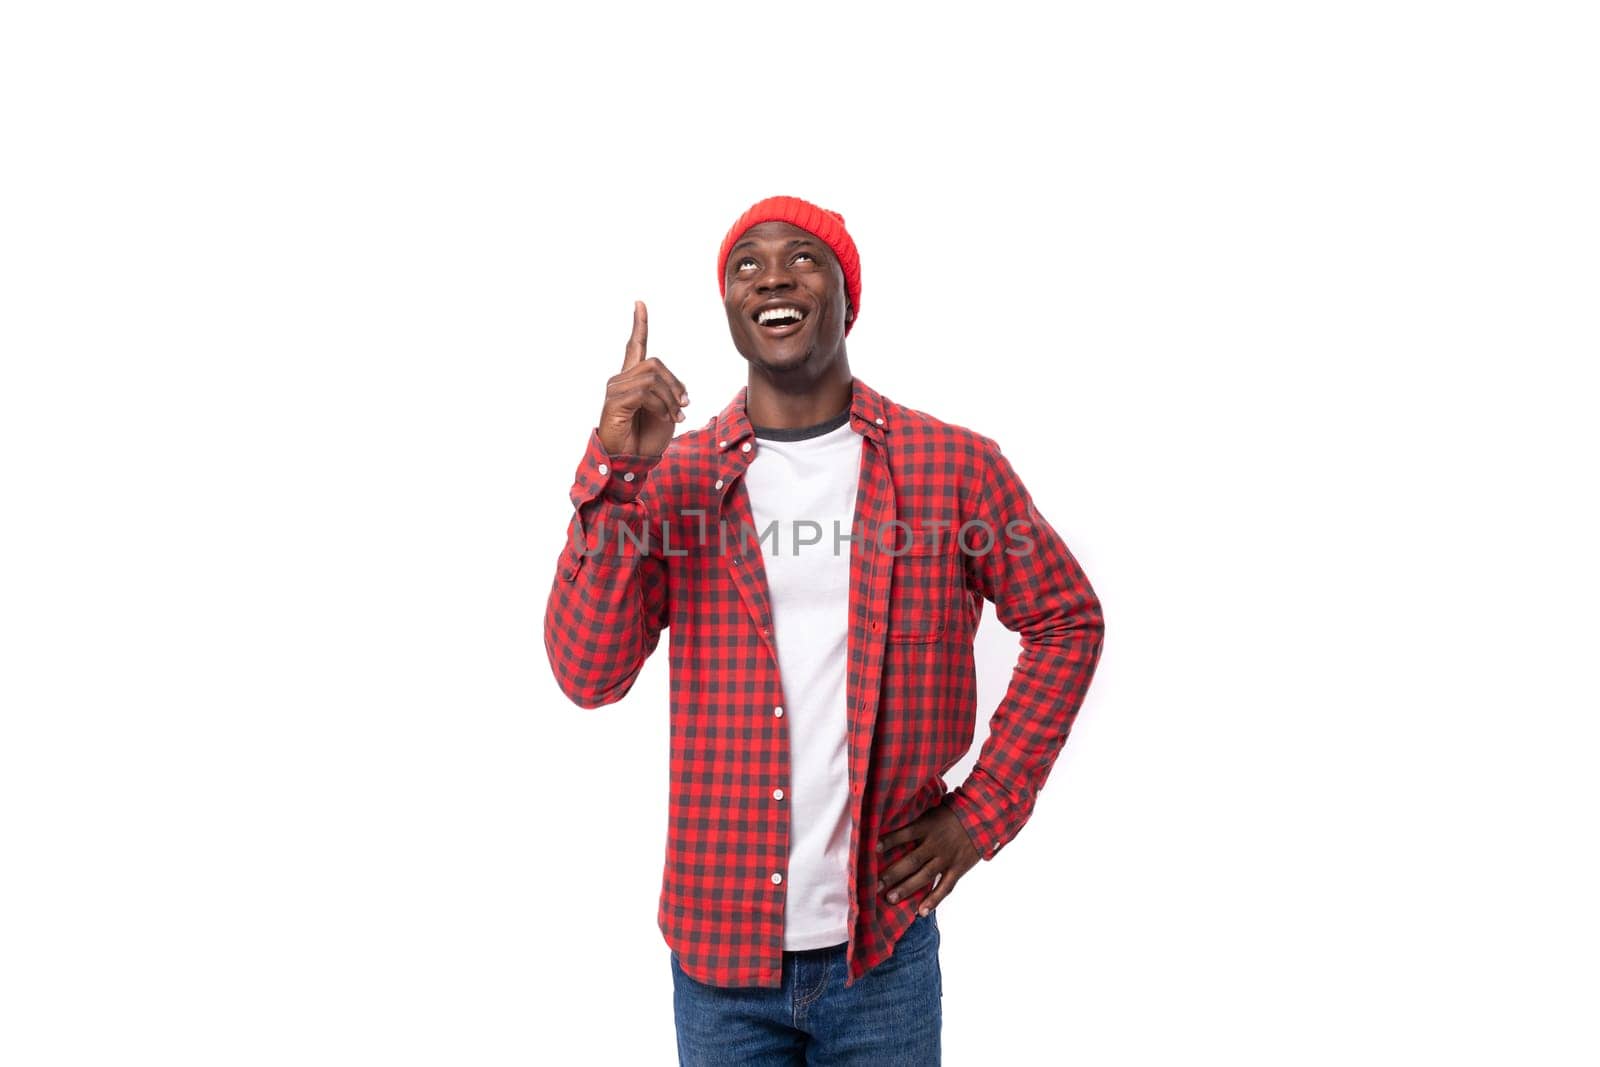 handsome joyful dark-skinned man in a casual plaid shirt of a model appearance with inspiration wants to communicate an idea on a white background with copy space by TRMK